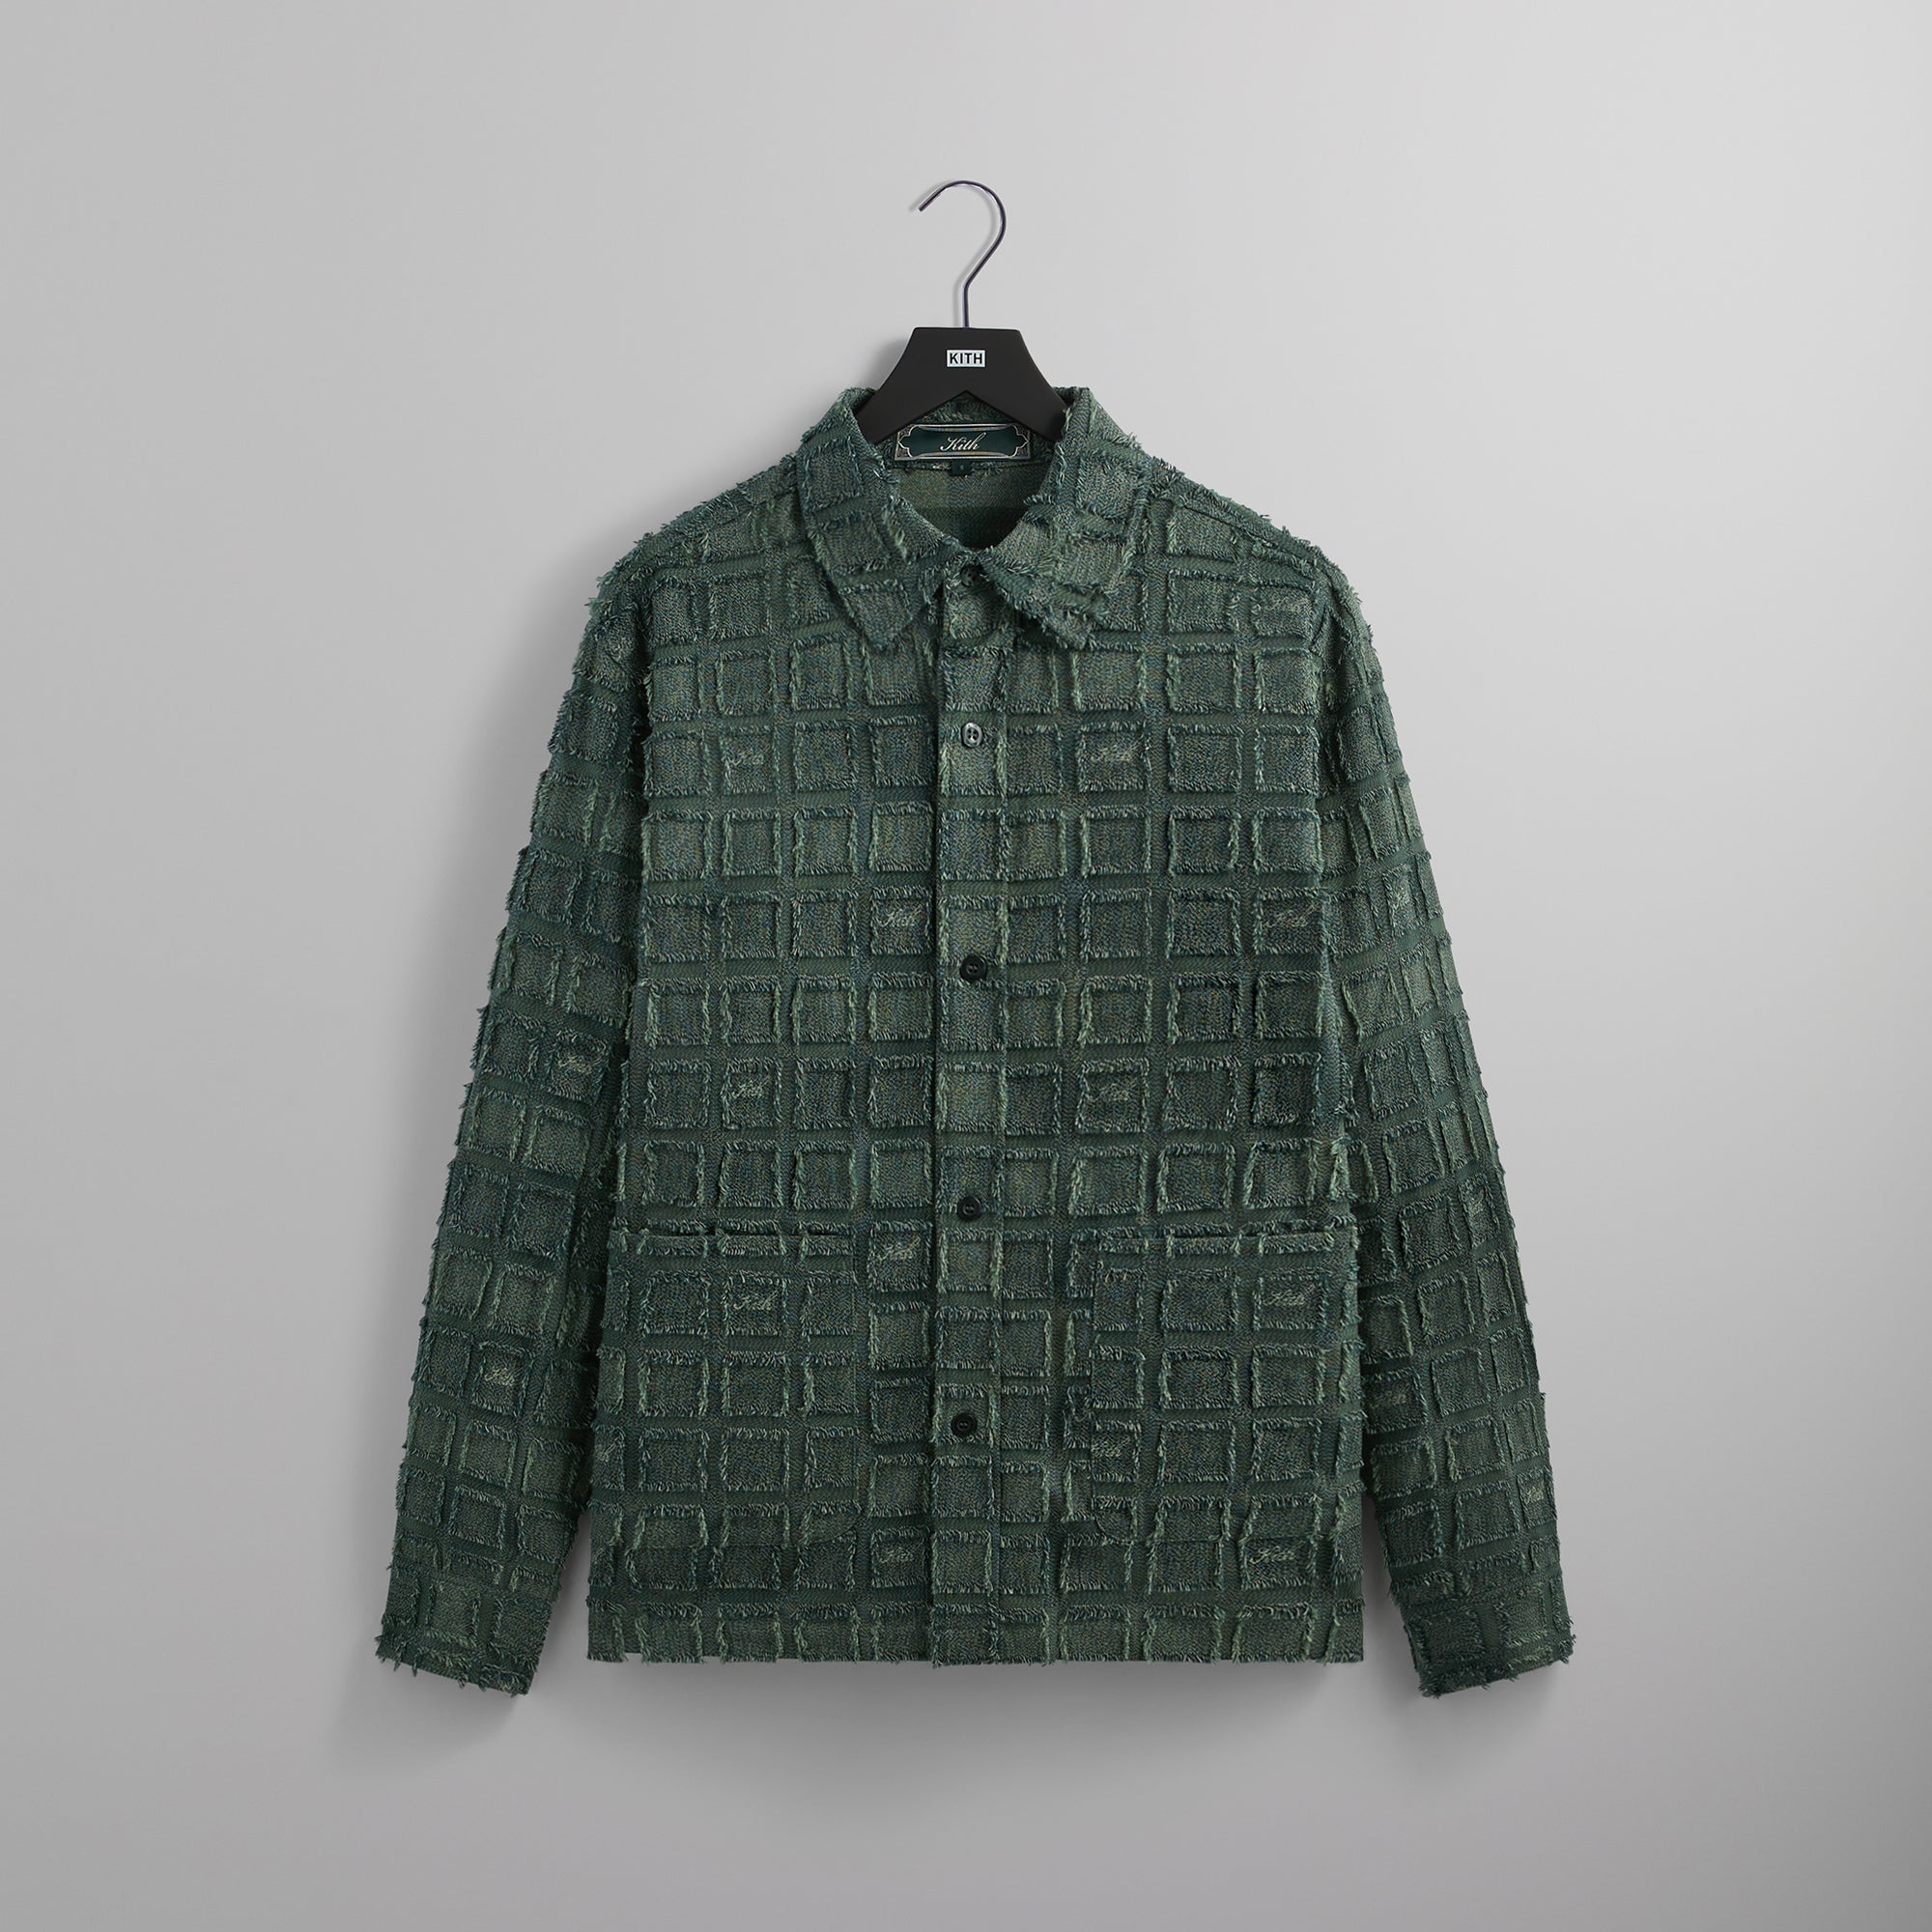 Louis Vuitton Printed Cotton Fil Coupe Overshirt Green. Size M0